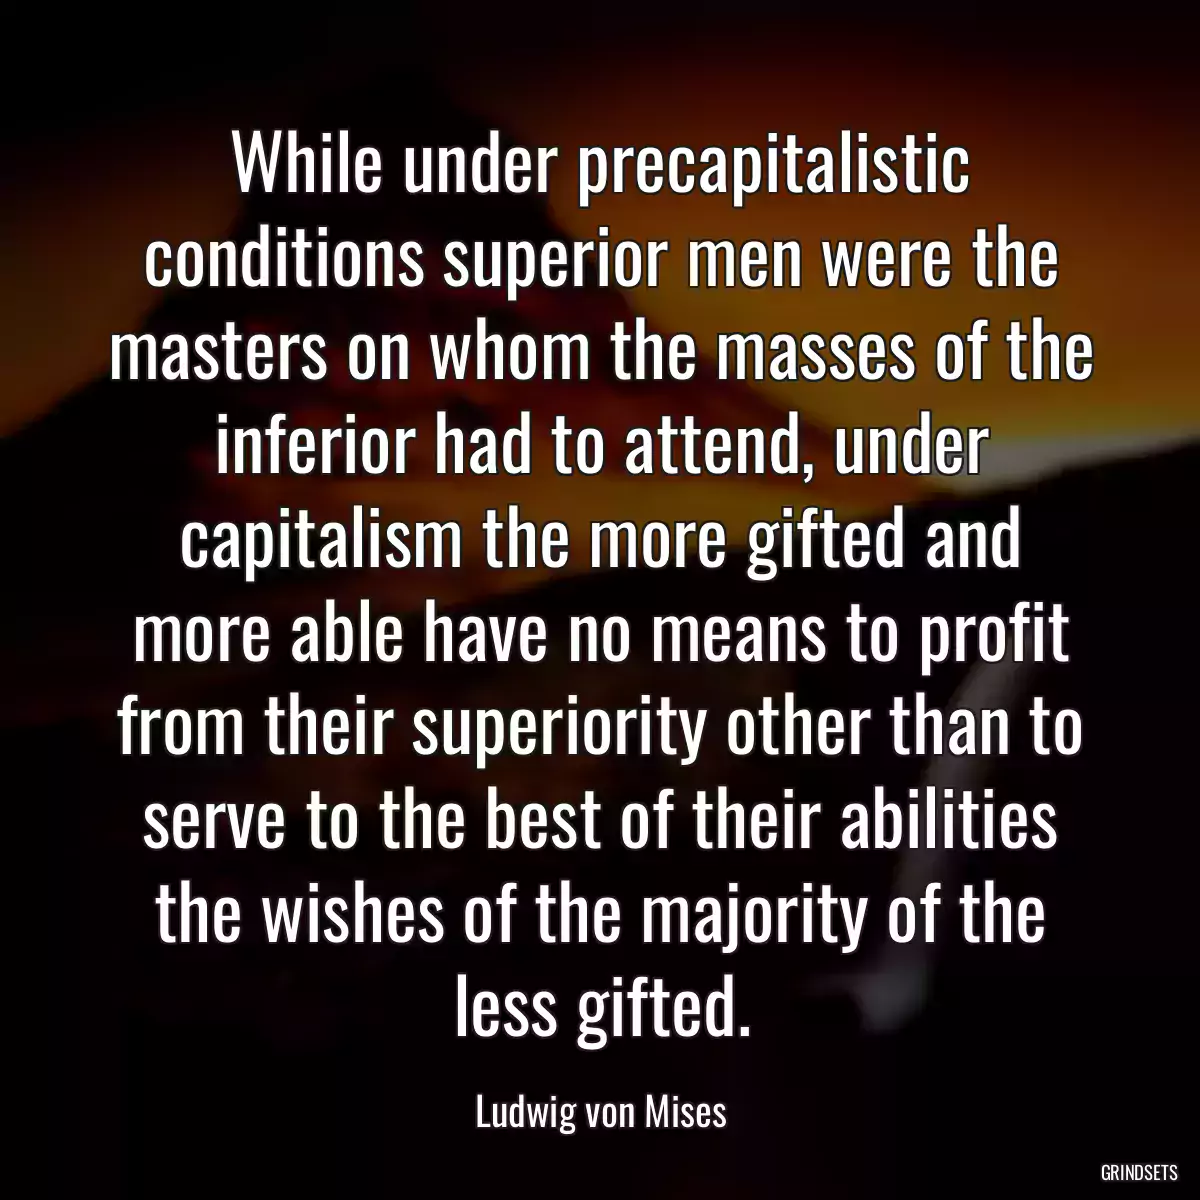 While under precapitalistic conditions superior men were the masters on whom the masses of the inferior had to attend, under capitalism the more gifted and more able have no means to profit from their superiority other than to serve to the best of their abilities the wishes of the majority of the less gifted.